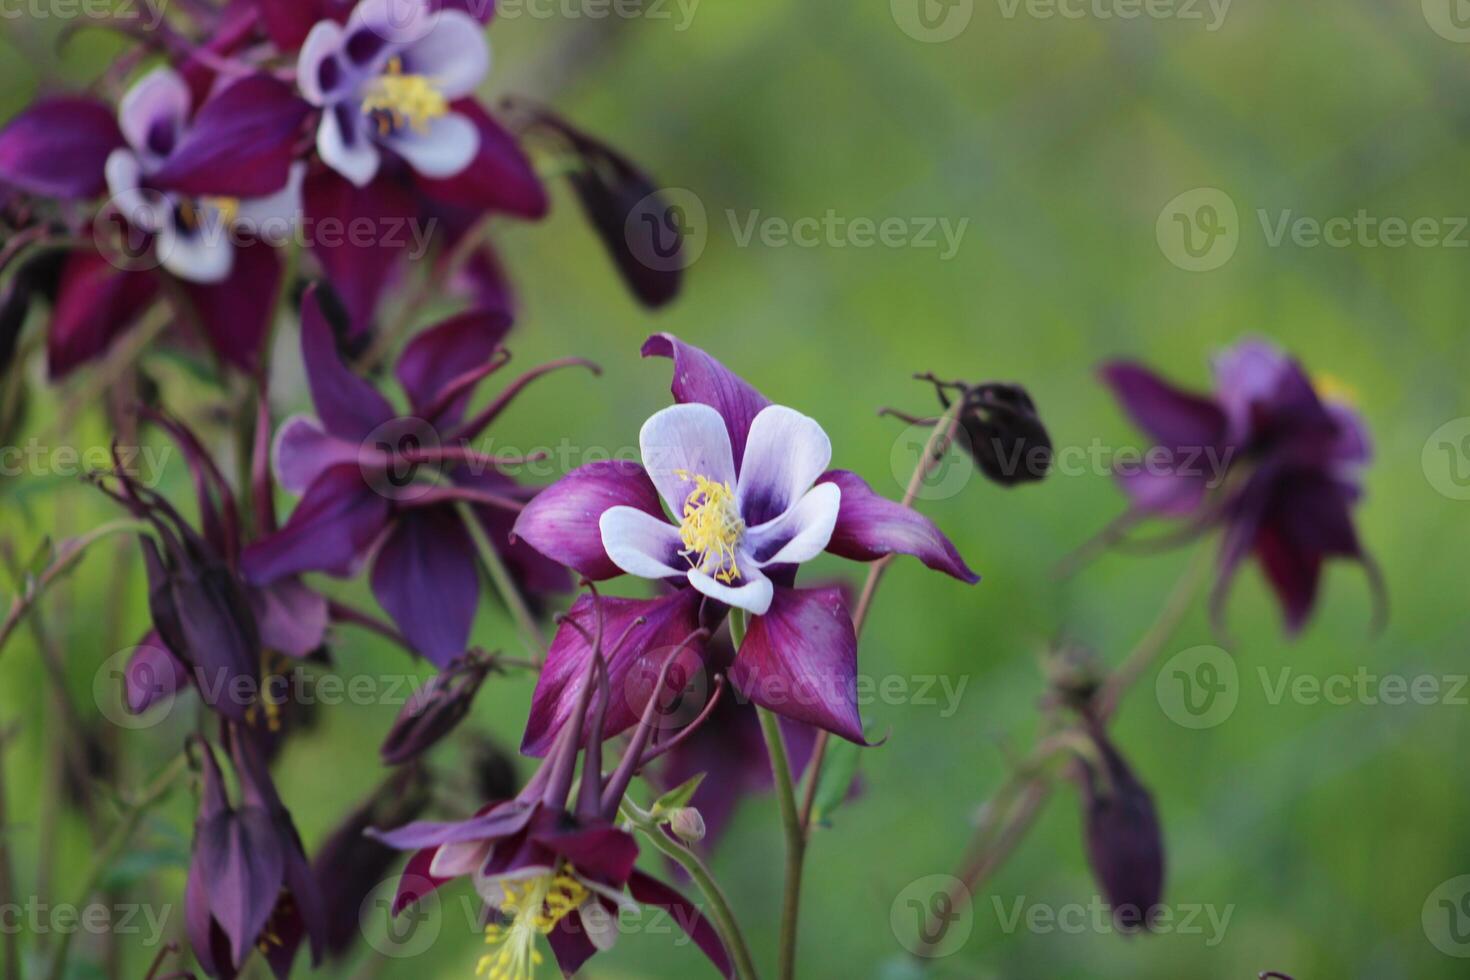 Aquilegia coerulea, the Colorado blue columbine, is a species of flowering plant in the buttercup family Ranunculaceae, photo